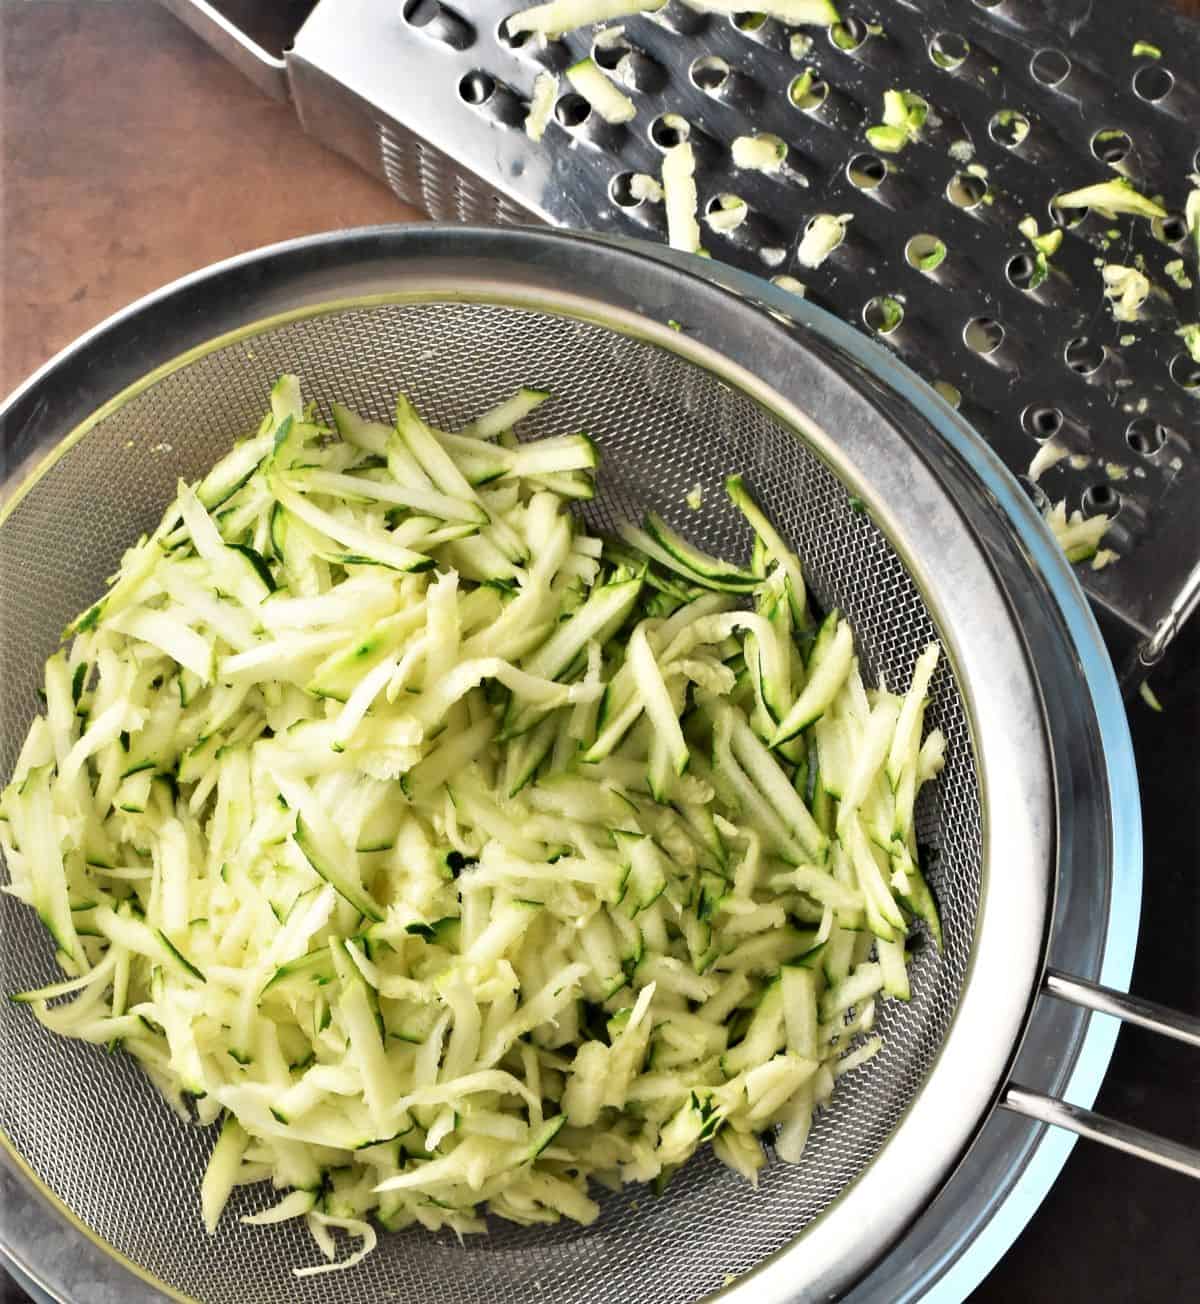 Shredded courgette in sieve with grater in background.